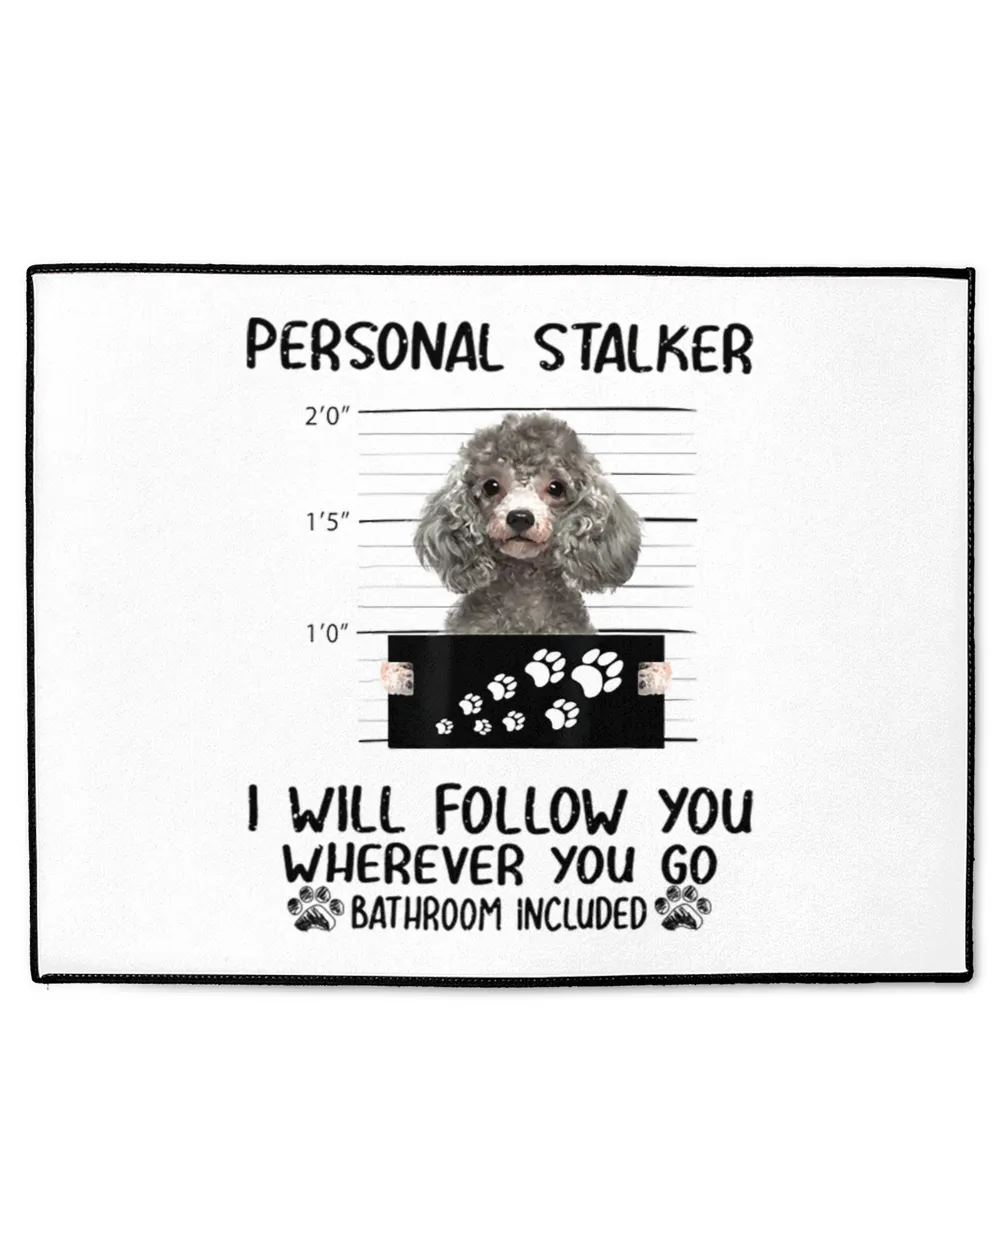 Personal Stalker  Personal Stalker Dog Poodle I Will Follow You